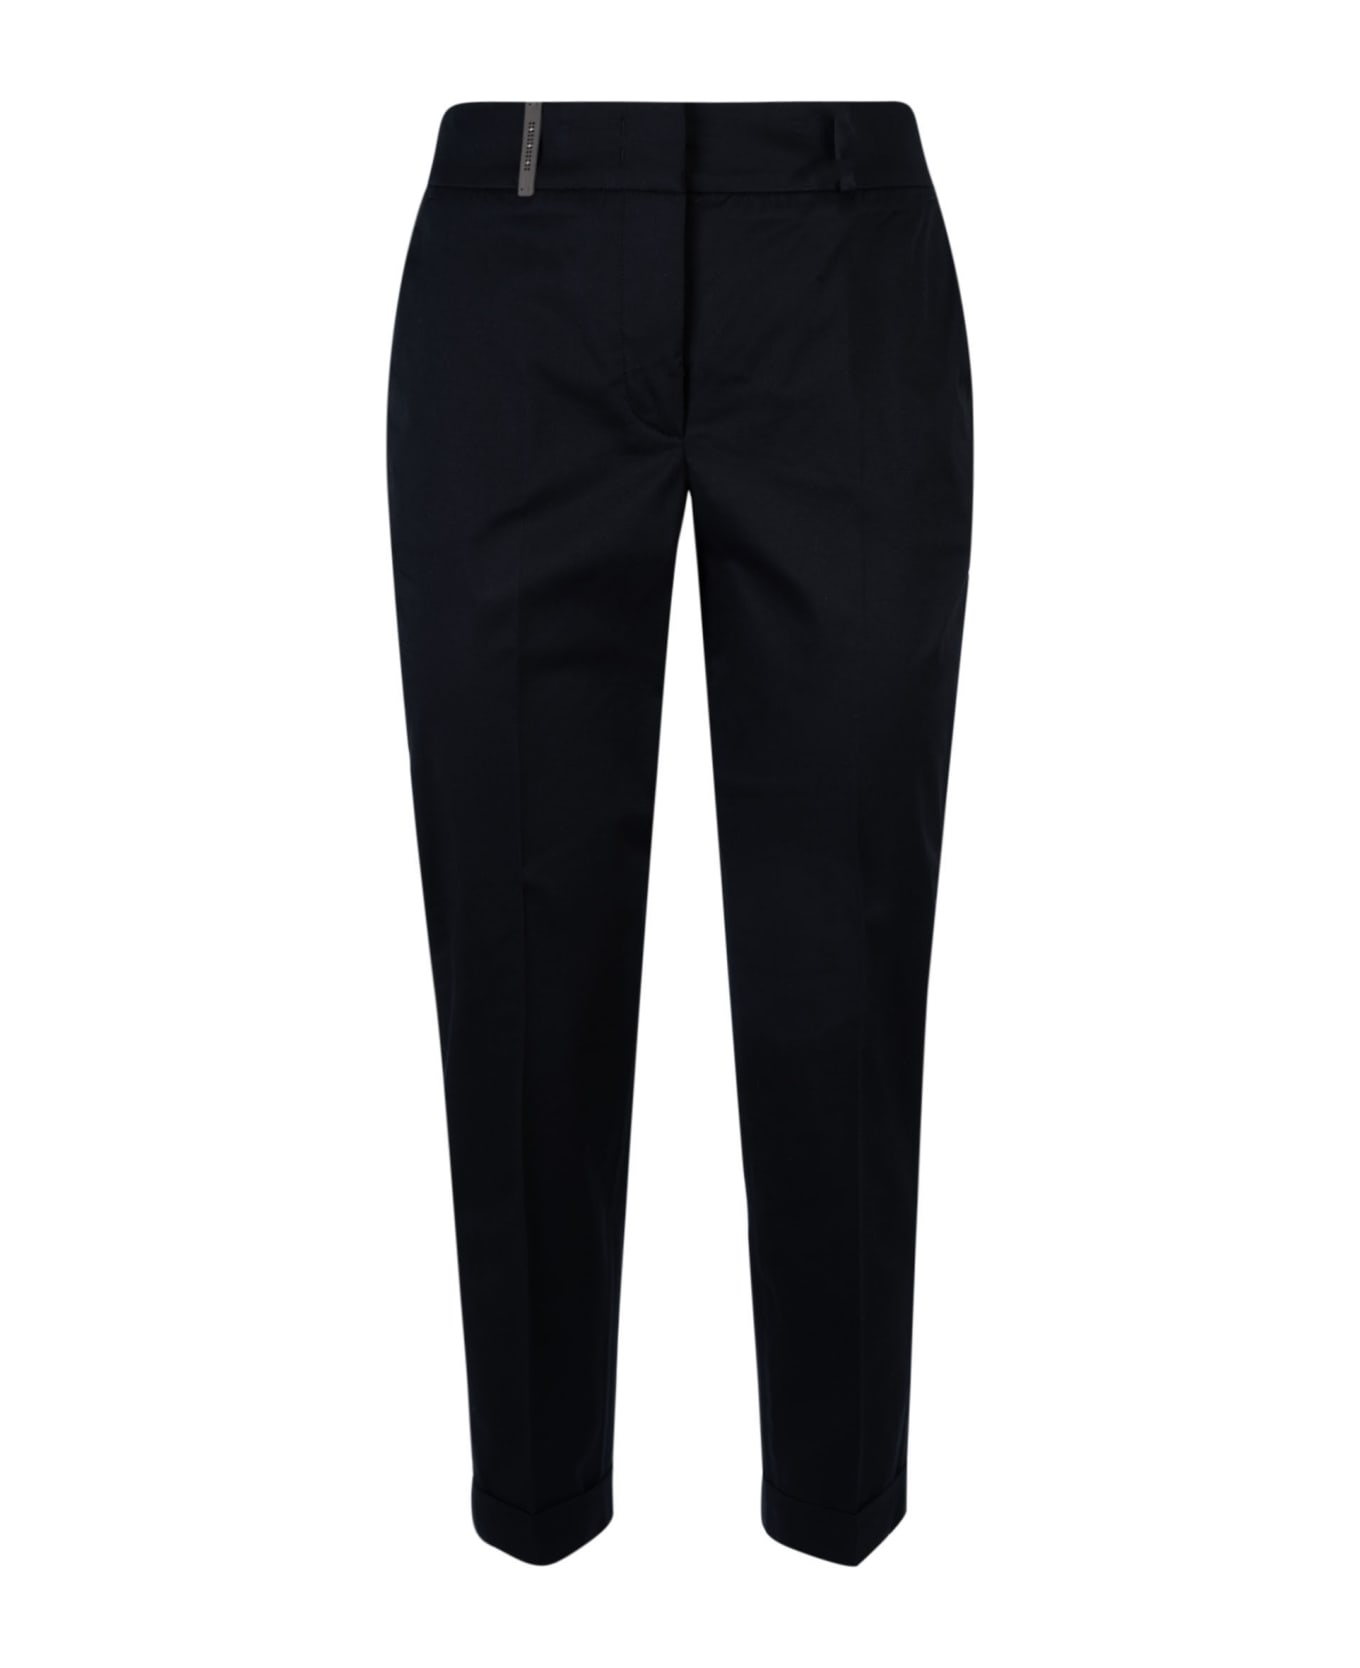 Peserico Concealed Trousers - C